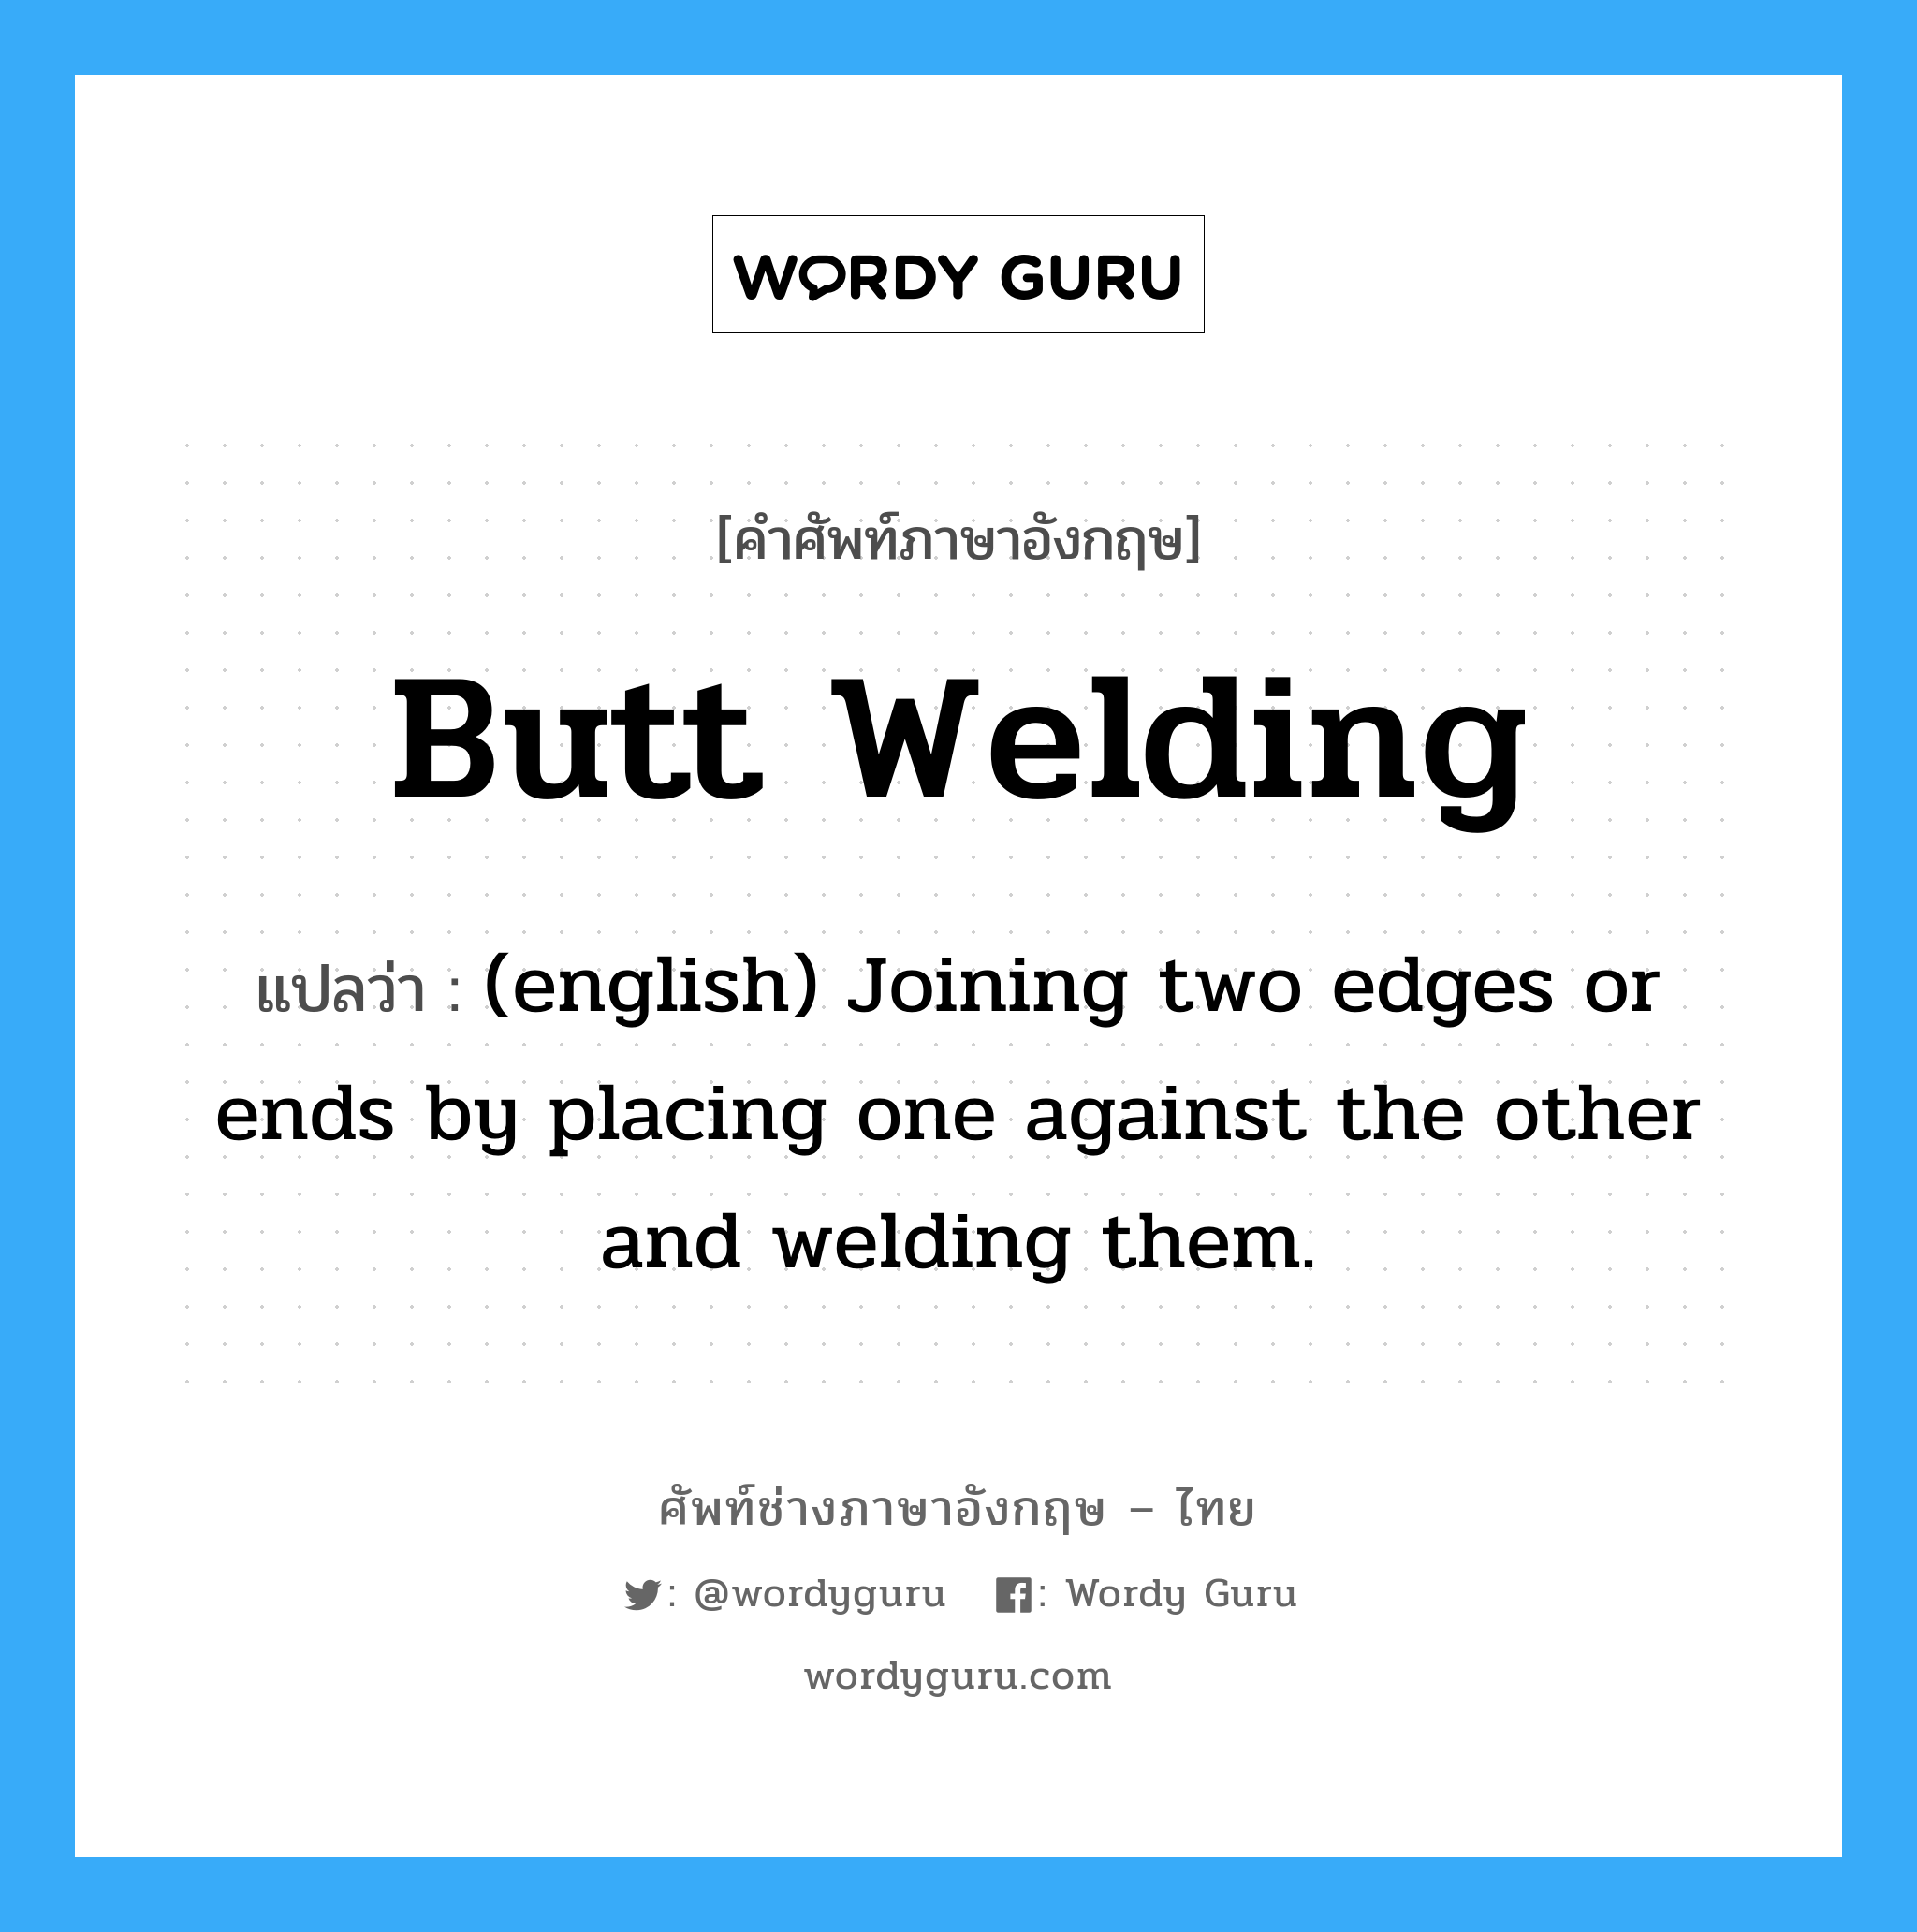 Butt Welding แปลว่า?, คำศัพท์ช่างภาษาอังกฤษ - ไทย Butt Welding คำศัพท์ภาษาอังกฤษ Butt Welding แปลว่า (english) Joining two edges or ends by placing one against the other and welding them.